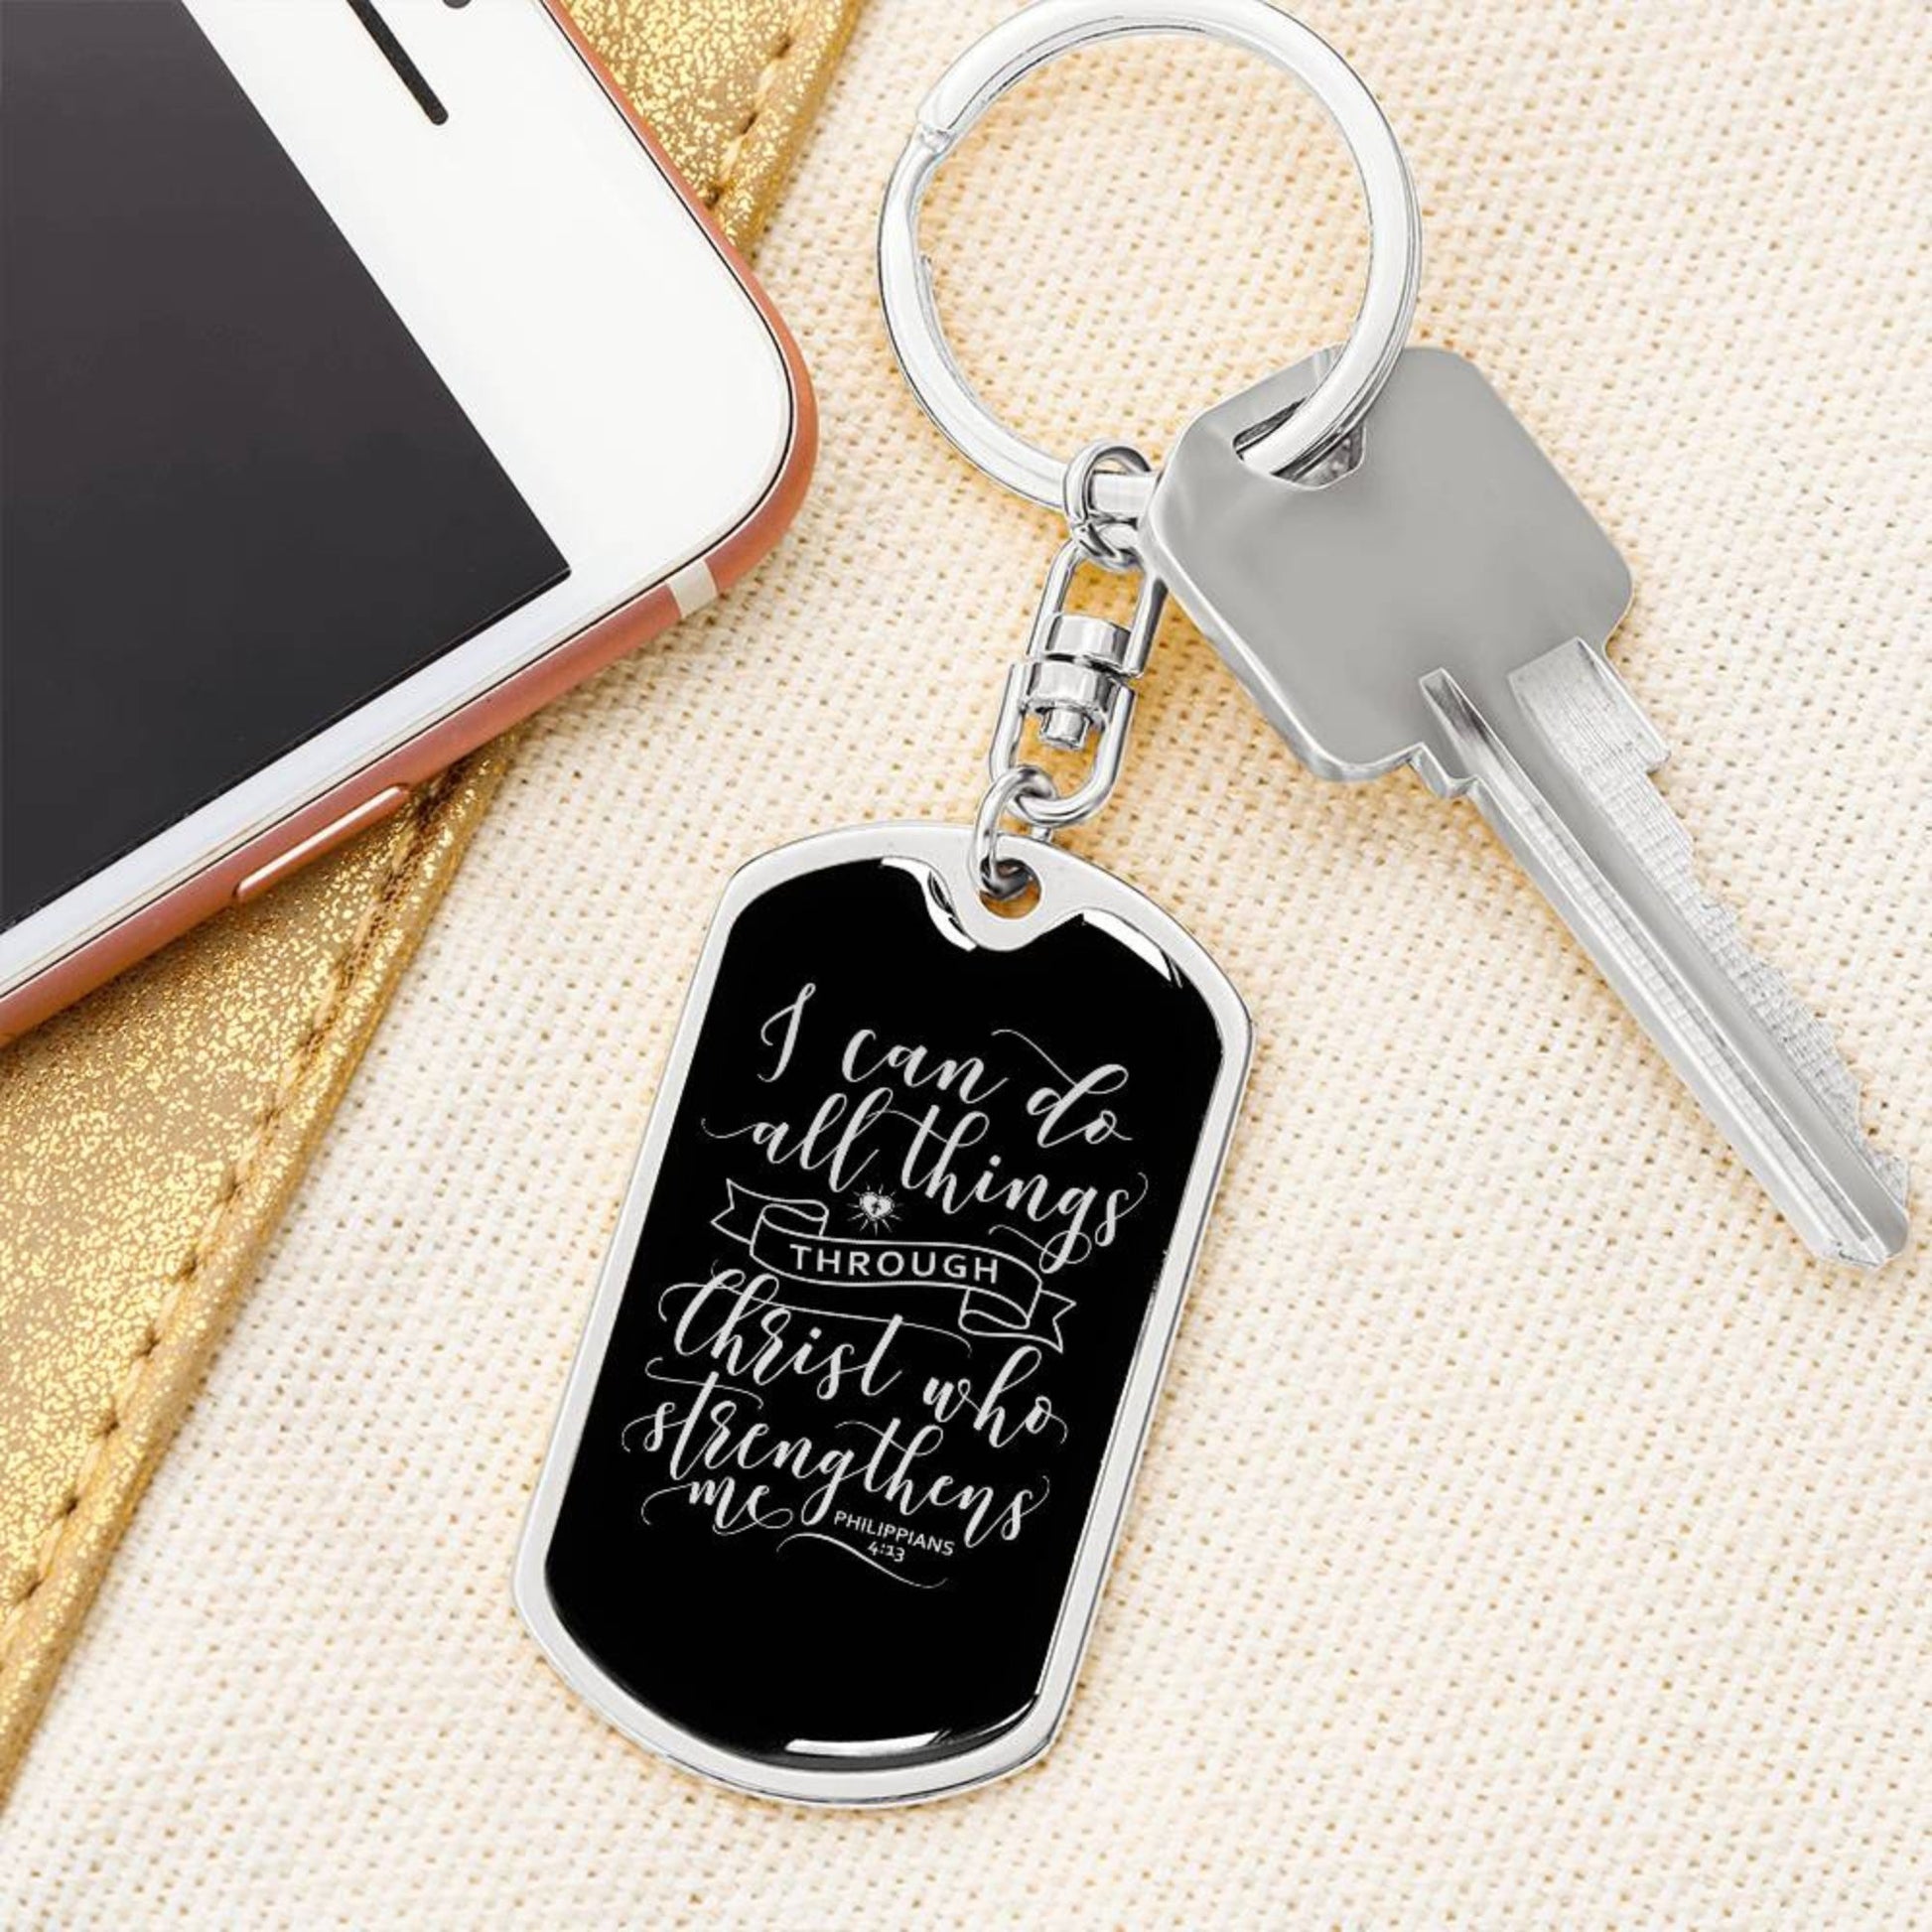 I Can Do All Things - Silver Dog Tag with Swivel Keychain Engraving: No Jesus Passion Apparel